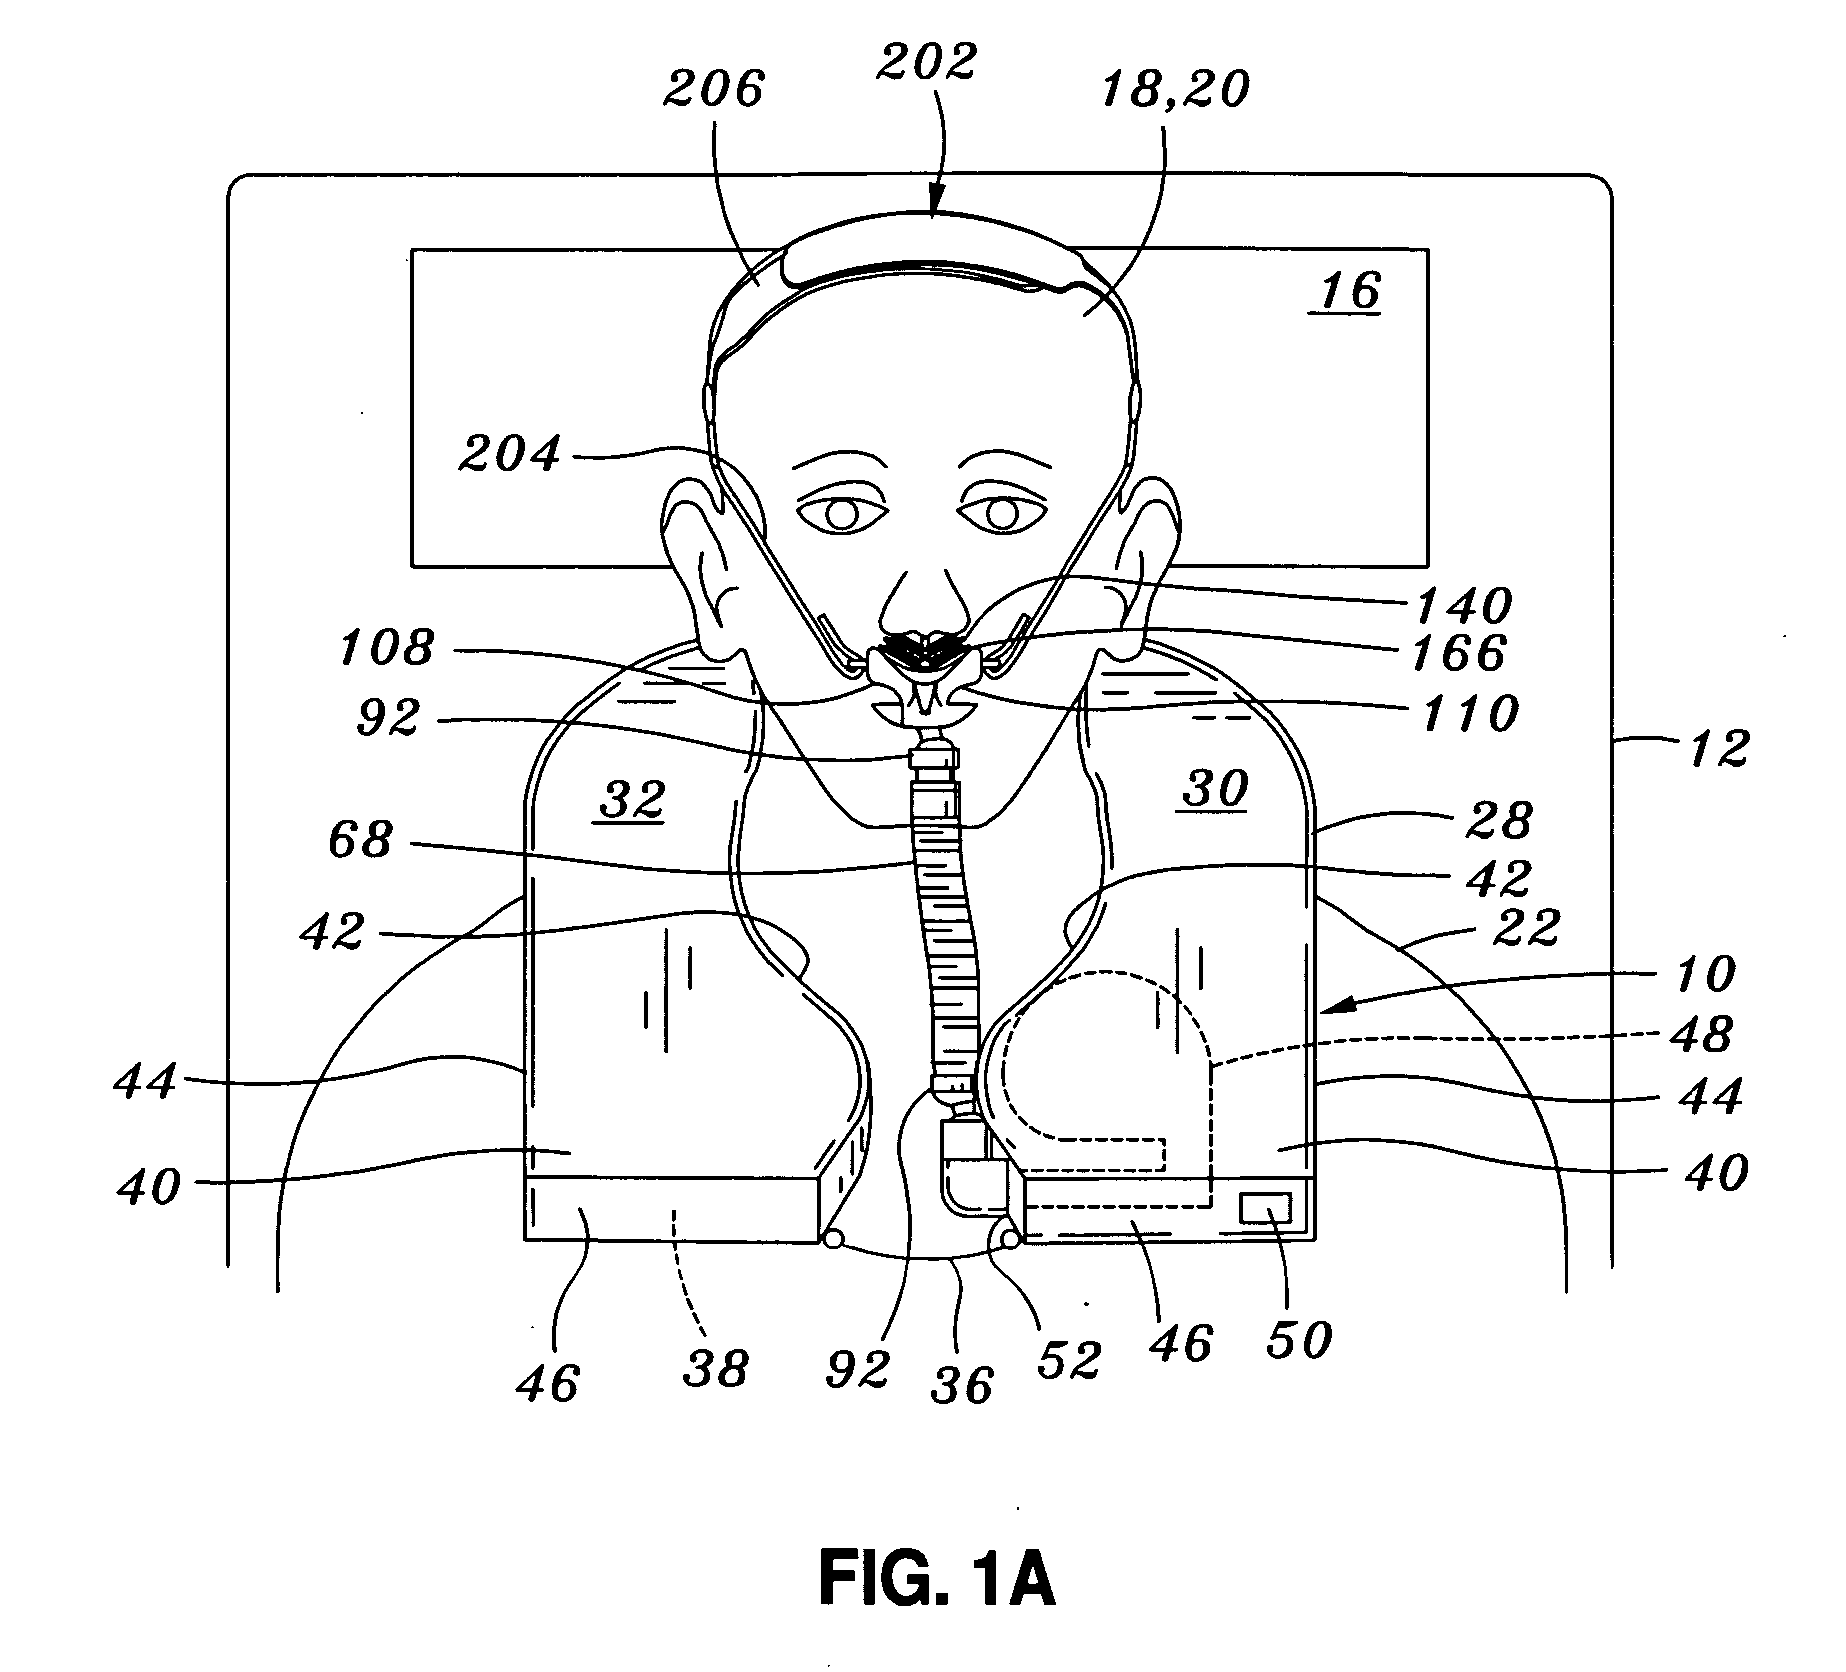 User interface and head gear for a continuous positive airway pressure device